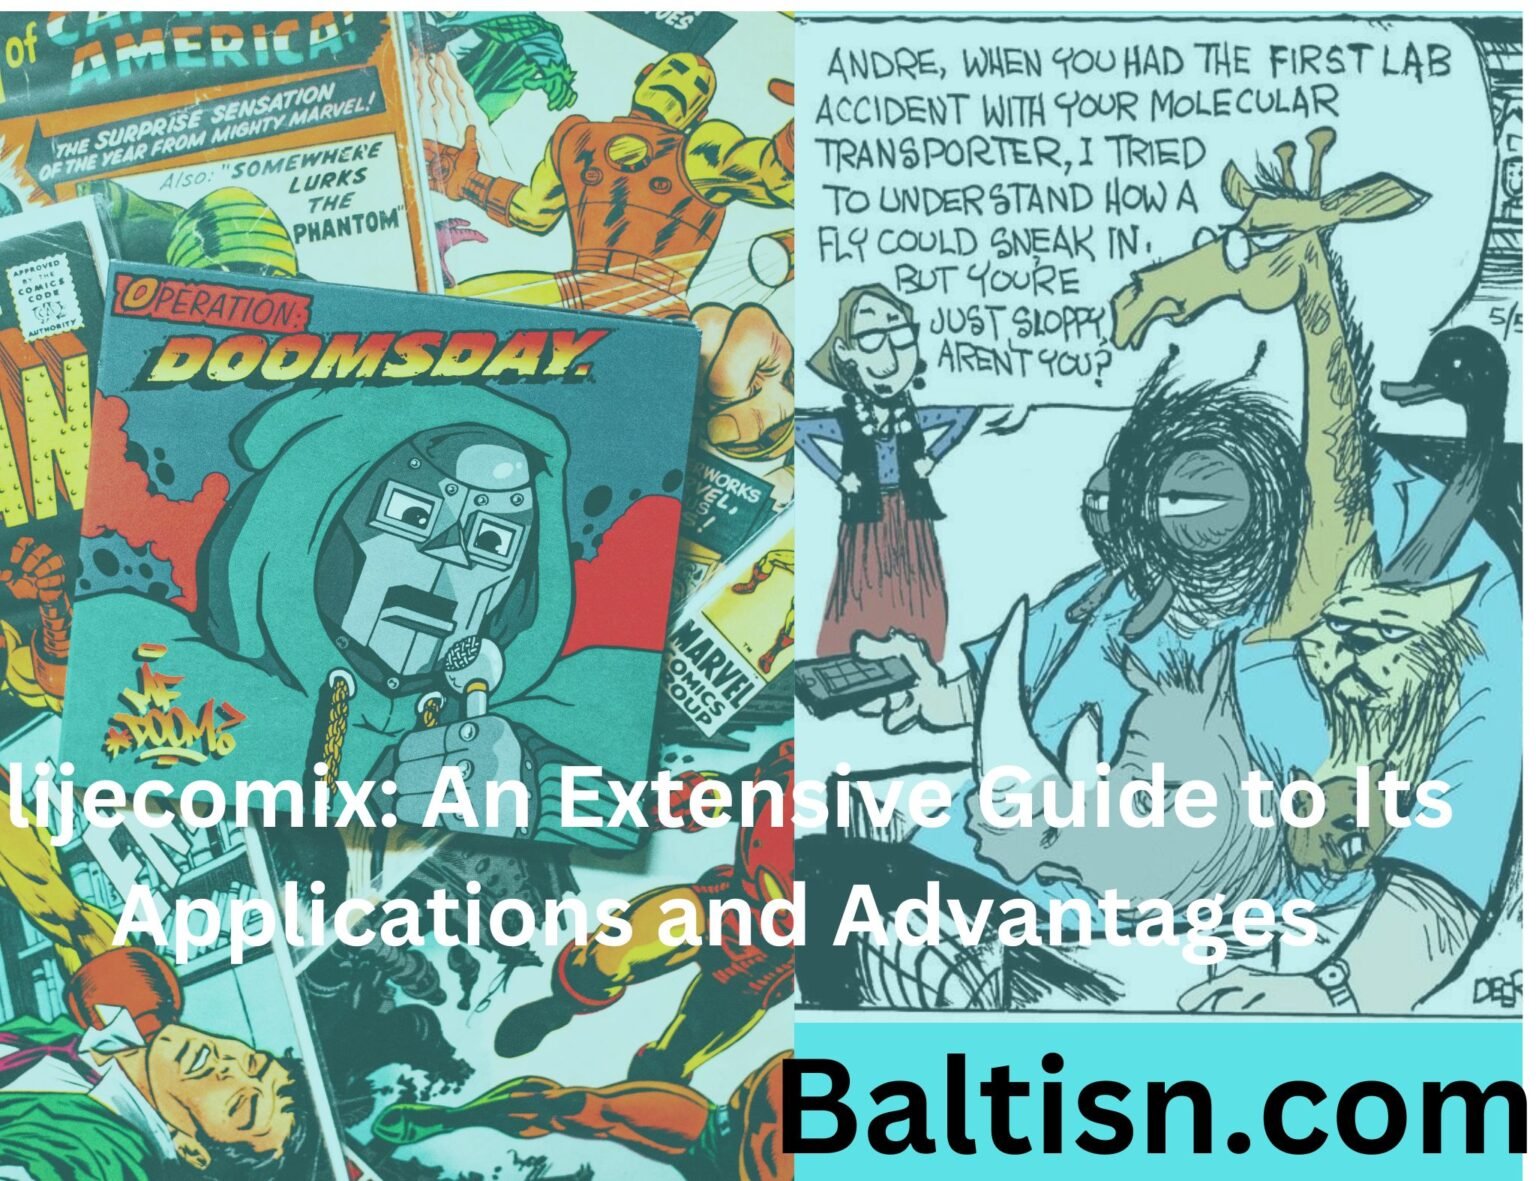 Ilijecomix: An Extensive Guide to Its Applications and Advantages